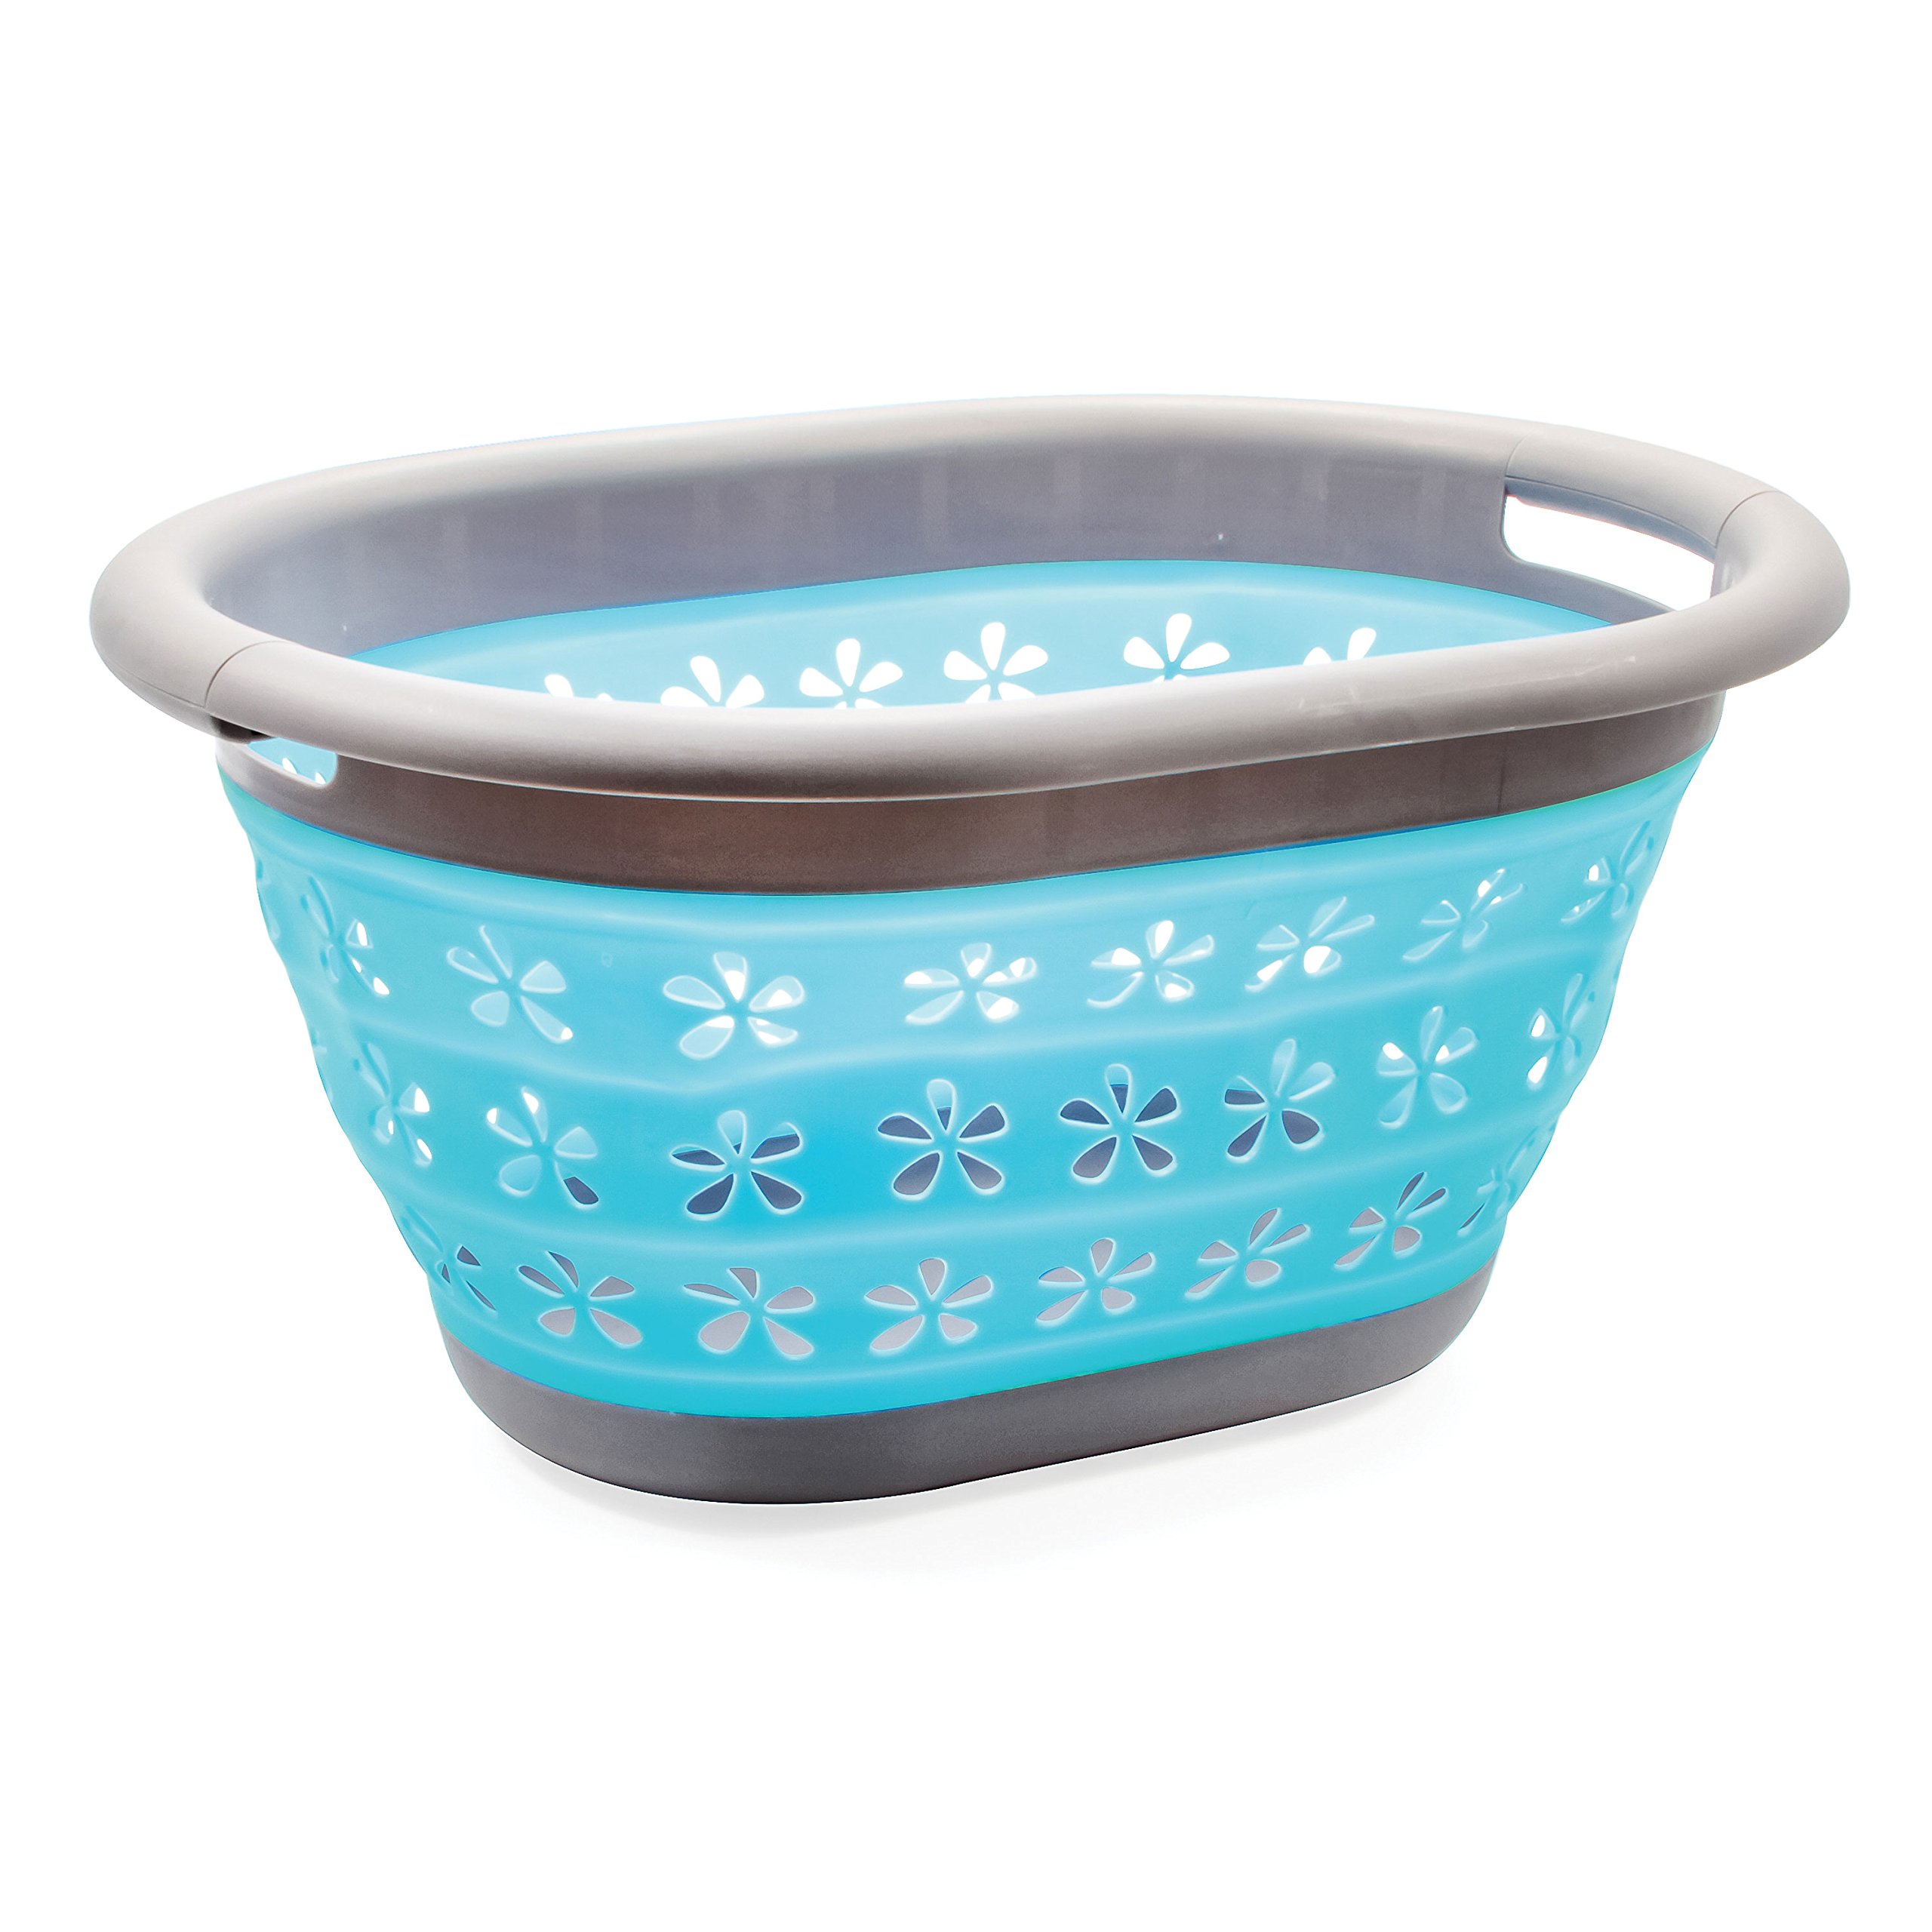 COLLAPSIBLE UTILITY BASKET SMALL GRAY/TEAL